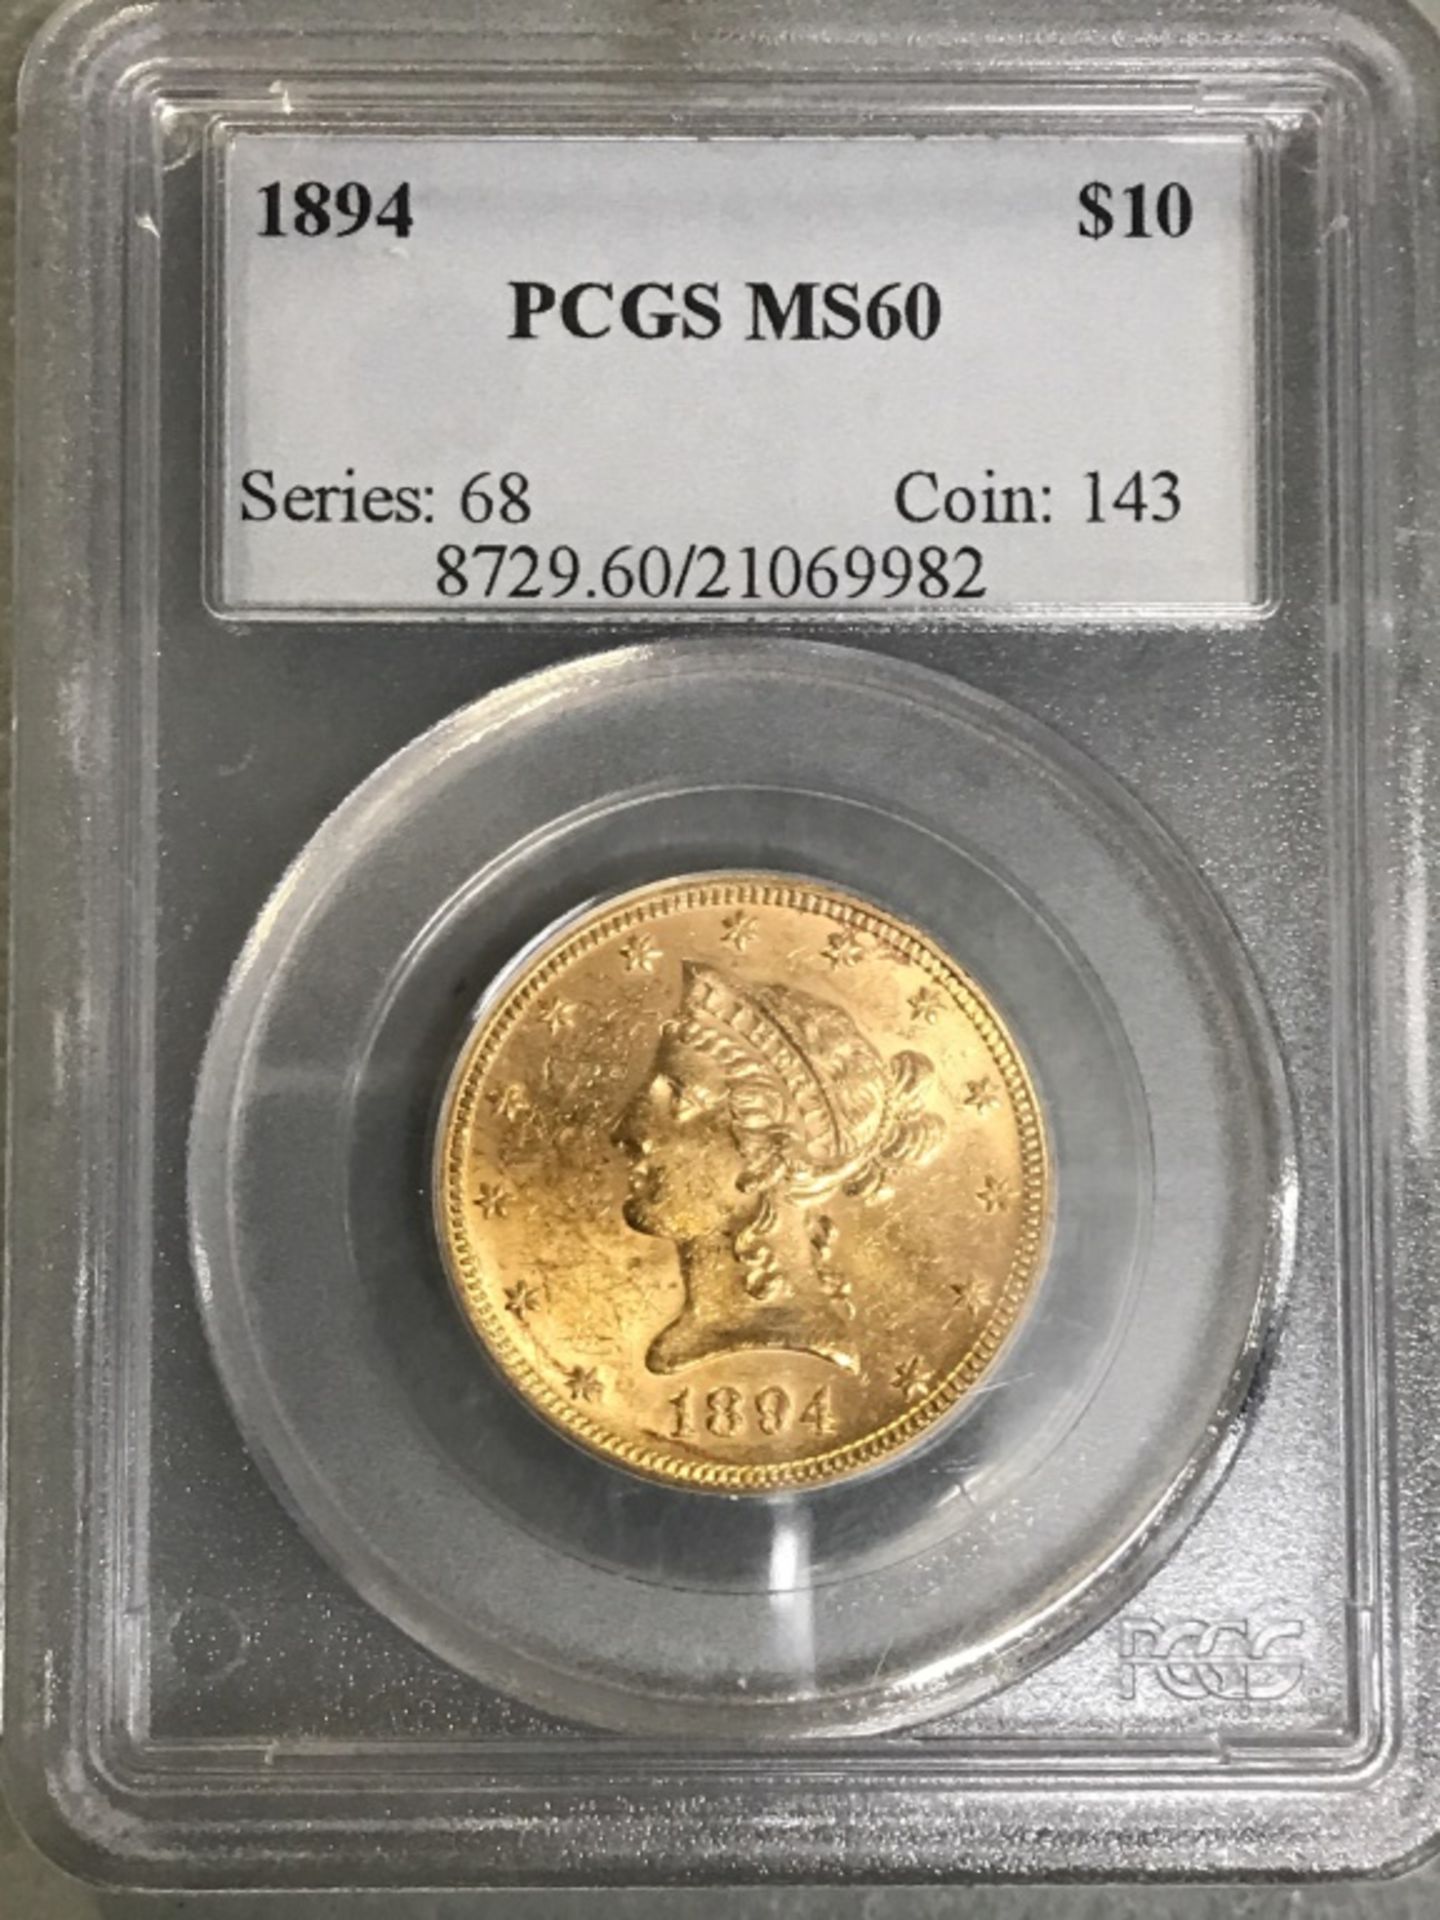 $10 US Gold MS 60 1894 - Image 5 of 9